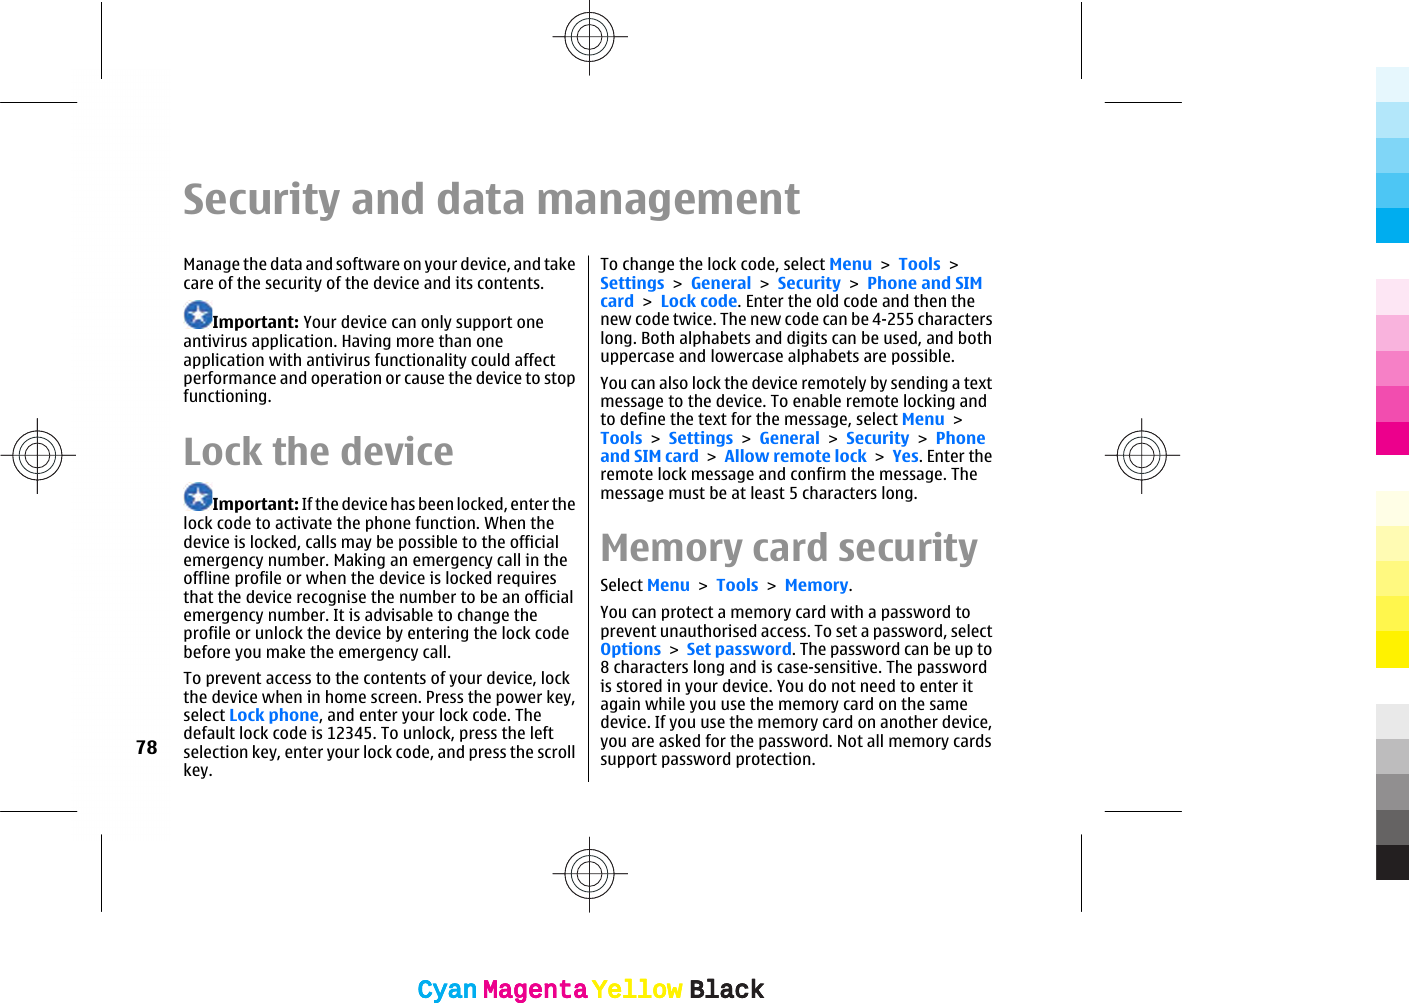 Security and data managementManage the data and software on your device, and takecare of the security of the device and its contents.Important: Your device can only support oneantivirus application. Having more than oneapplication with antivirus functionality could affectperformance and operation or cause the device to stopfunctioning.Lock the deviceImportant: If the device has been locked, enter thelock code to activate the phone function. When thedevice is locked, calls may be possible to the officialemergency number. Making an emergency call in theoffline profile or when the device is locked requiresthat the device recognise the number to be an officialemergency number. It is advisable to change theprofile or unlock the device by entering the lock codebefore you make the emergency call.To prevent access to the contents of your device, lockthe device when in home screen. Press the power key,select Lock phone, and enter your lock code. Thedefault lock code is 12345. To unlock, press the leftselection key, enter your lock code, and press the scrollkey.To change the lock code, select Menu &gt; Tools &gt;Settings &gt; General &gt; Security &gt; Phone and SIMcard &gt; Lock code. Enter the old code and then thenew code twice. The new code can be 4-255 characterslong. Both alphabets and digits can be used, and bothuppercase and lowercase alphabets are possible.You can also lock the device remotely by sending a textmessage to the device. To enable remote locking andto define the text for the message, select Menu &gt;Tools &gt; Settings &gt; General &gt; Security &gt; Phoneand SIM card &gt; Allow remote lock &gt; Yes. Enter theremote lock message and confirm the message. Themessage must be at least 5 characters long.Memory card securitySelect Menu &gt; Tools &gt; Memory.You can protect a memory card with a password toprevent unauthorised access. To set a password, selectOptions &gt; Set password. The password can be up to8 characters long and is case-sensitive. The passwordis stored in your device. You do not need to enter itagain while you use the memory card on the samedevice. If you use the memory card on another device,you are asked for the password. Not all memory cardssupport password protection.78CyanCyanMagentaMagentaYellowYellowBlackBlackCyanCyanMagentaMagentaYellowYellowBlackBlack